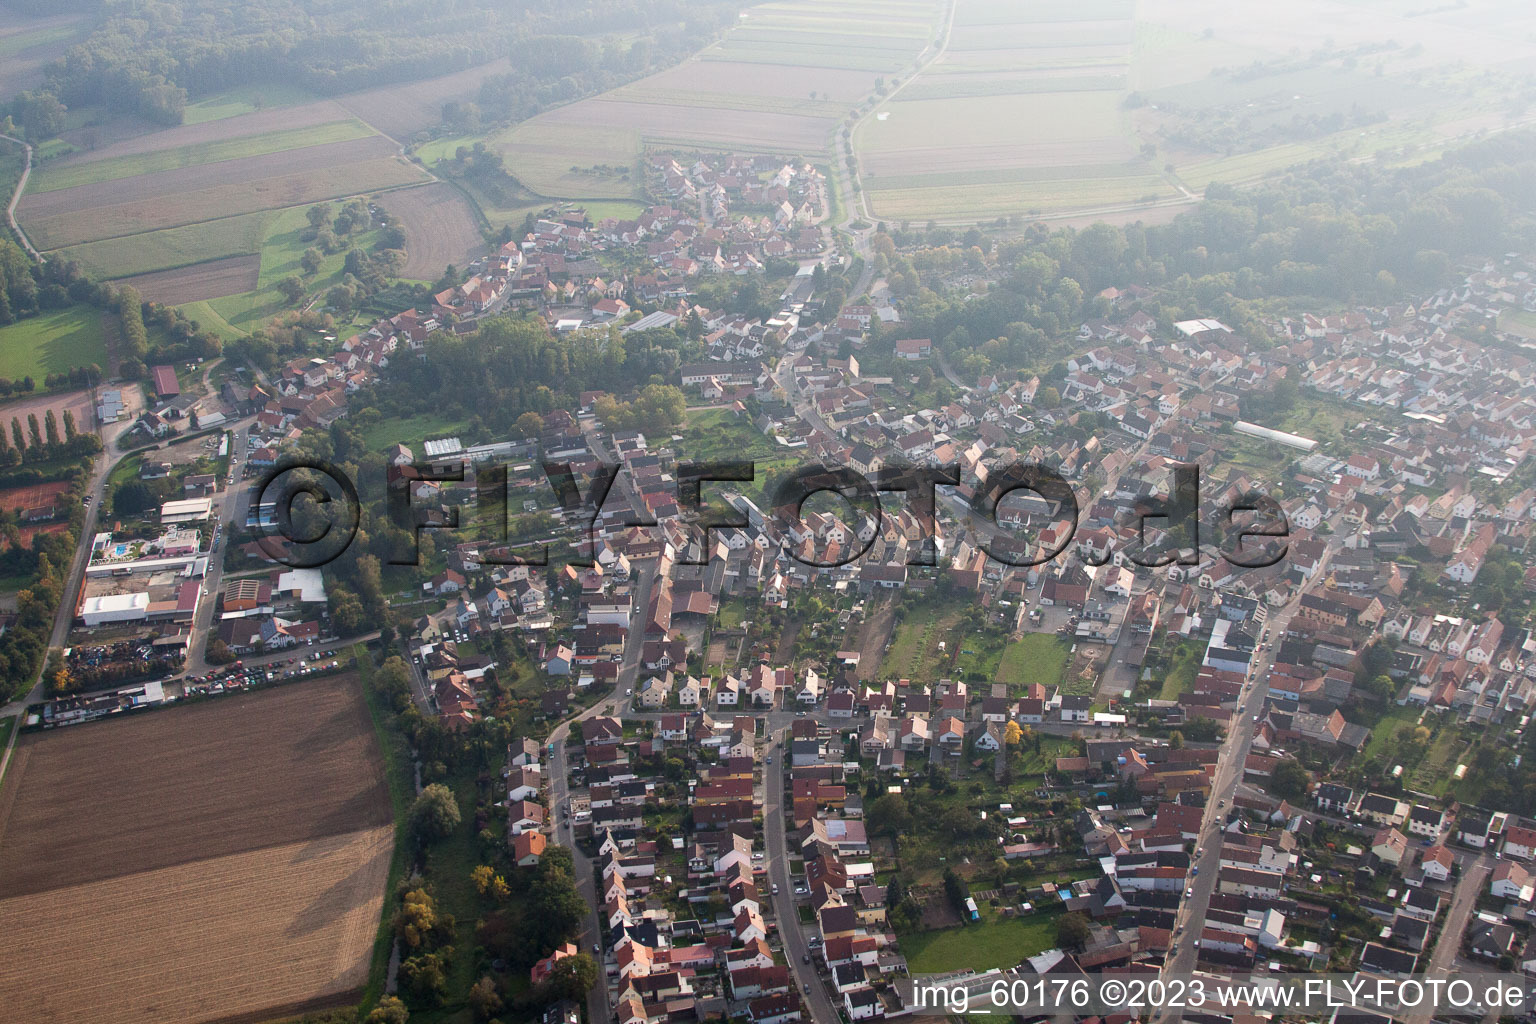 Drone image of Hördt in the state Rhineland-Palatinate, Germany